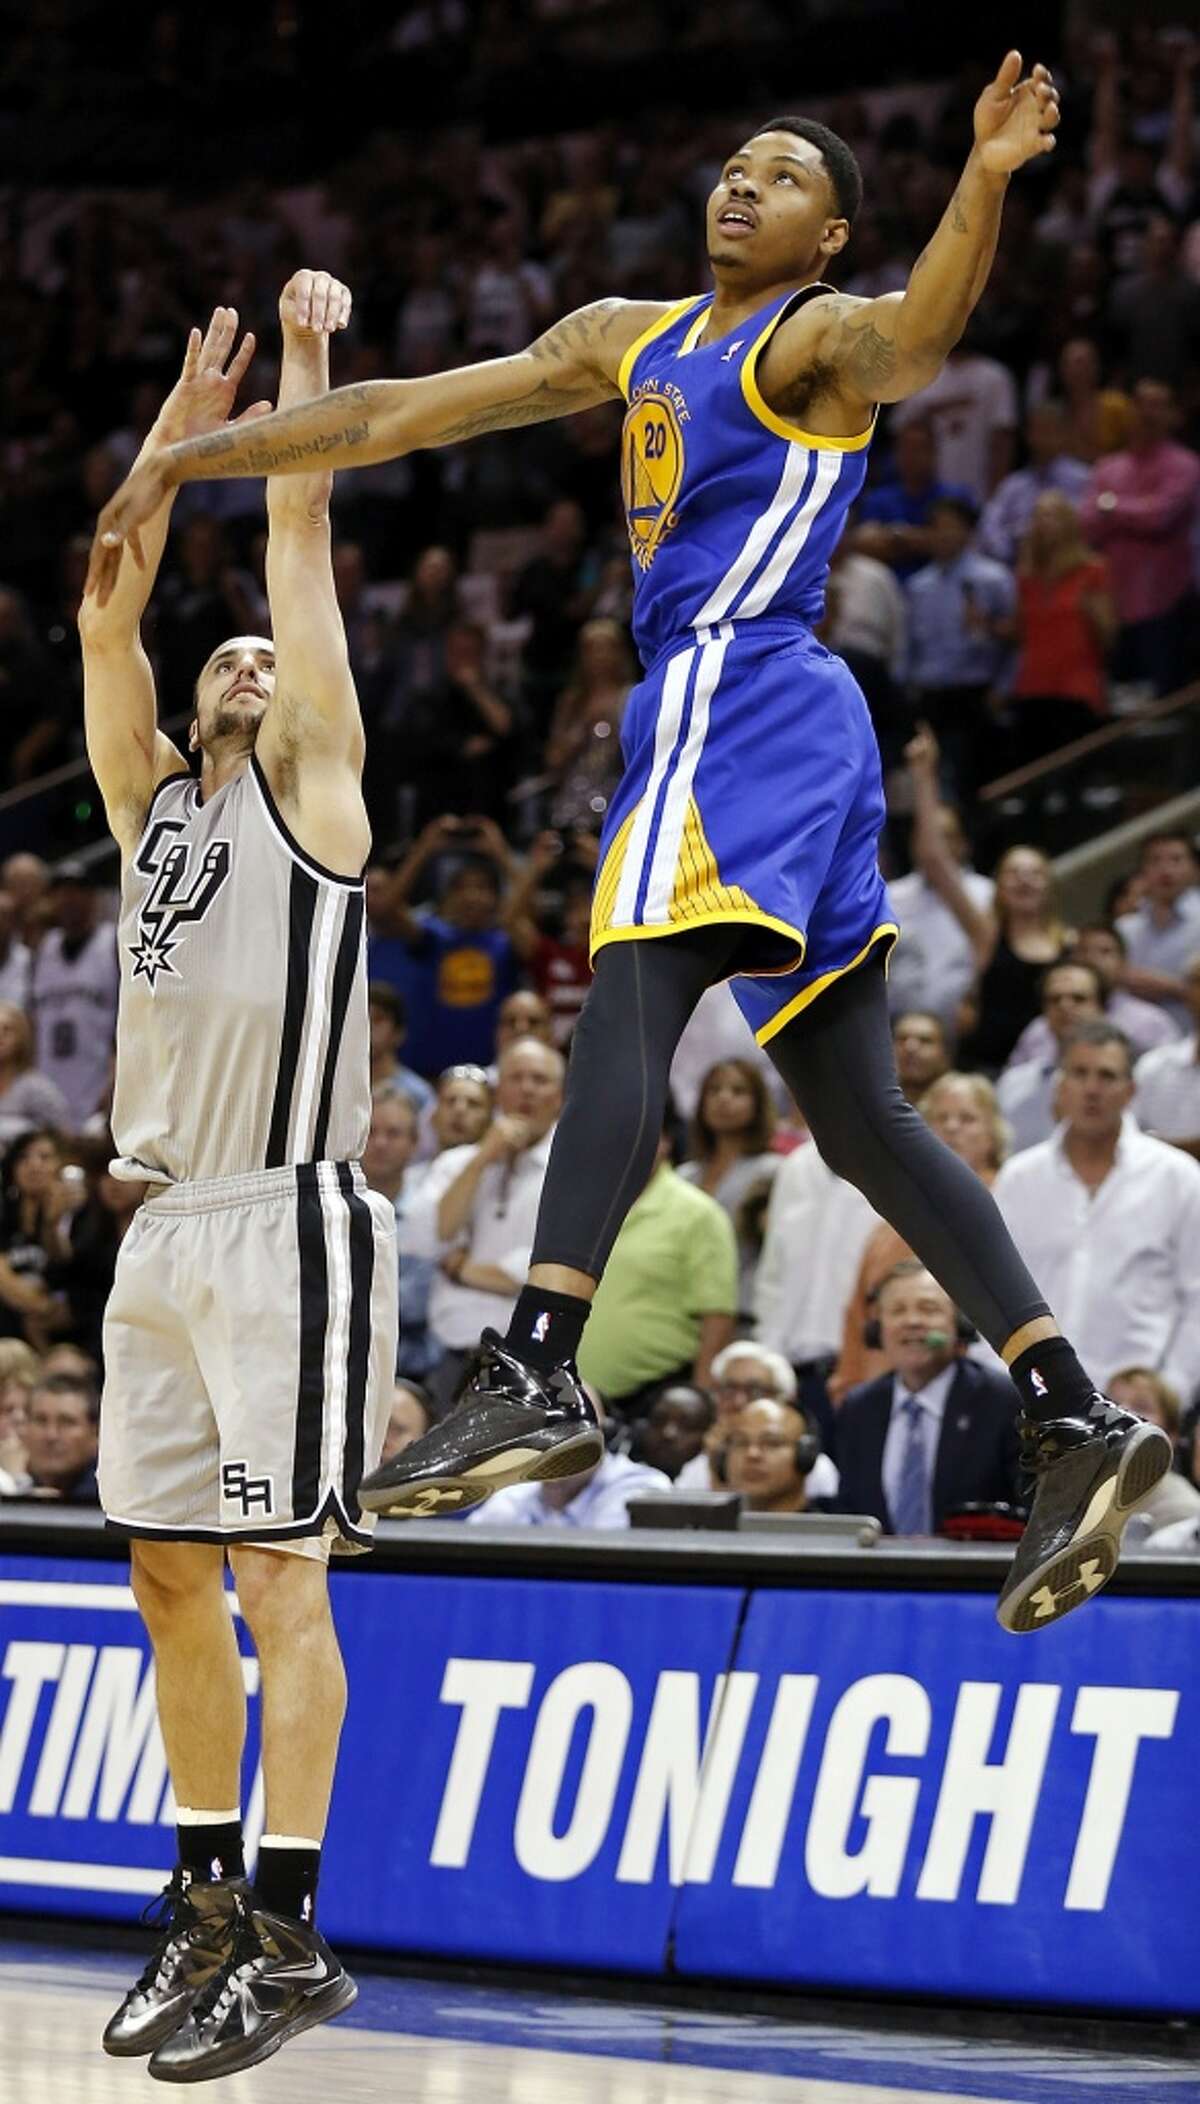 BEST — 2013 WEST SEMIFINALS Moment: Game 1 Victim: Golden State Note: Had missed 7 of 8 3-pointers and 15 shots overall before knocking down the game-winner in the second overtime. PHOTO: Ginobili watches his game-winning 3-pointer as he is defended by the Warriors' Kent Bazemore late in double overtime of Game 1 in the Western Conference semifinals on May 6, 2013, at the AT&T Center. The Spurs won 129-127 in double overtime.